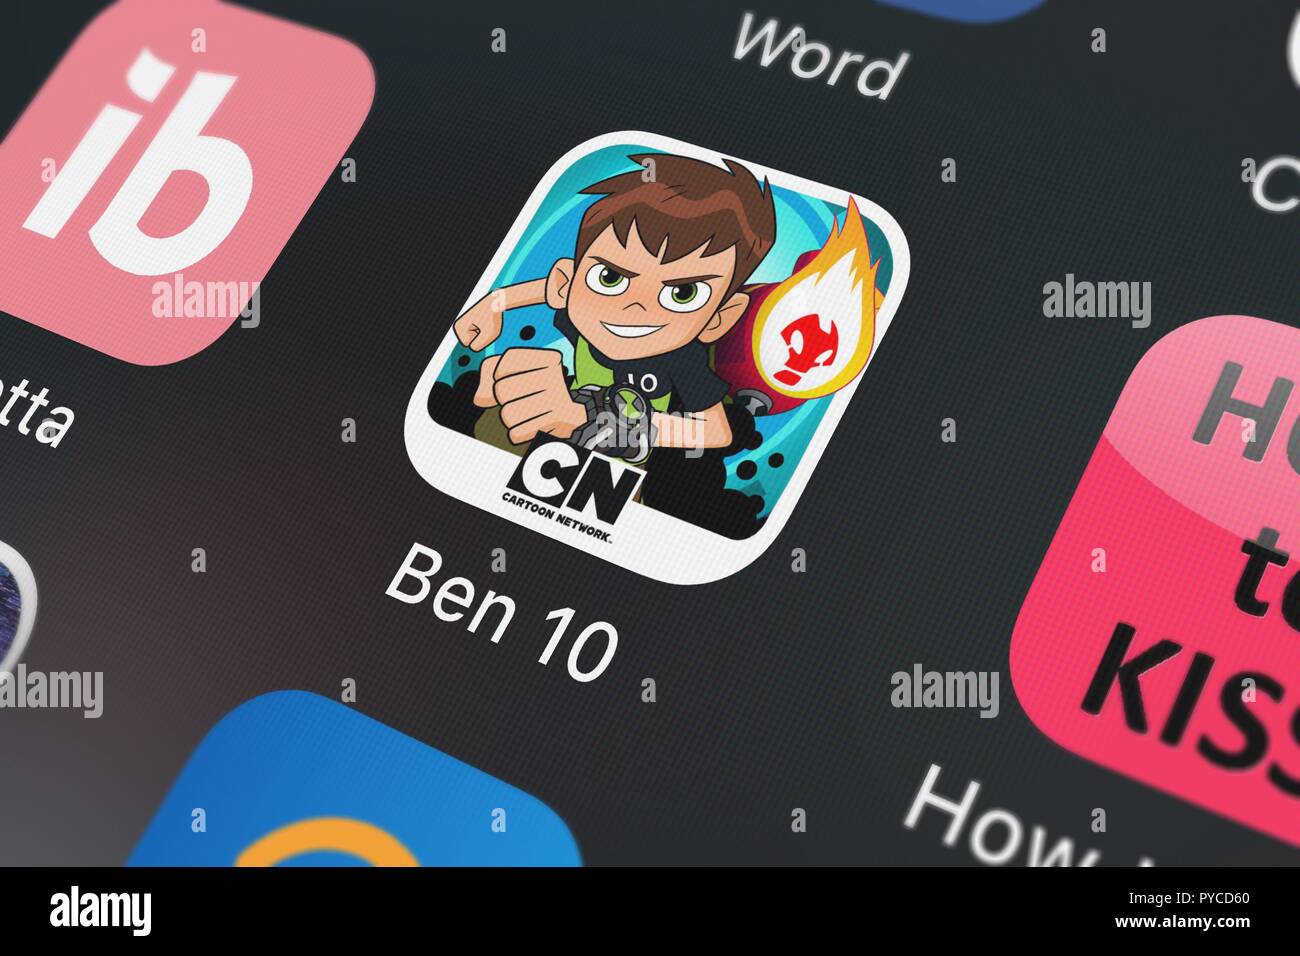 London, United Kingdom - October 26, 2018: Close-up shot of the Ben 10: Up to Speed mobile app from Cartoon Network. Stock Photo